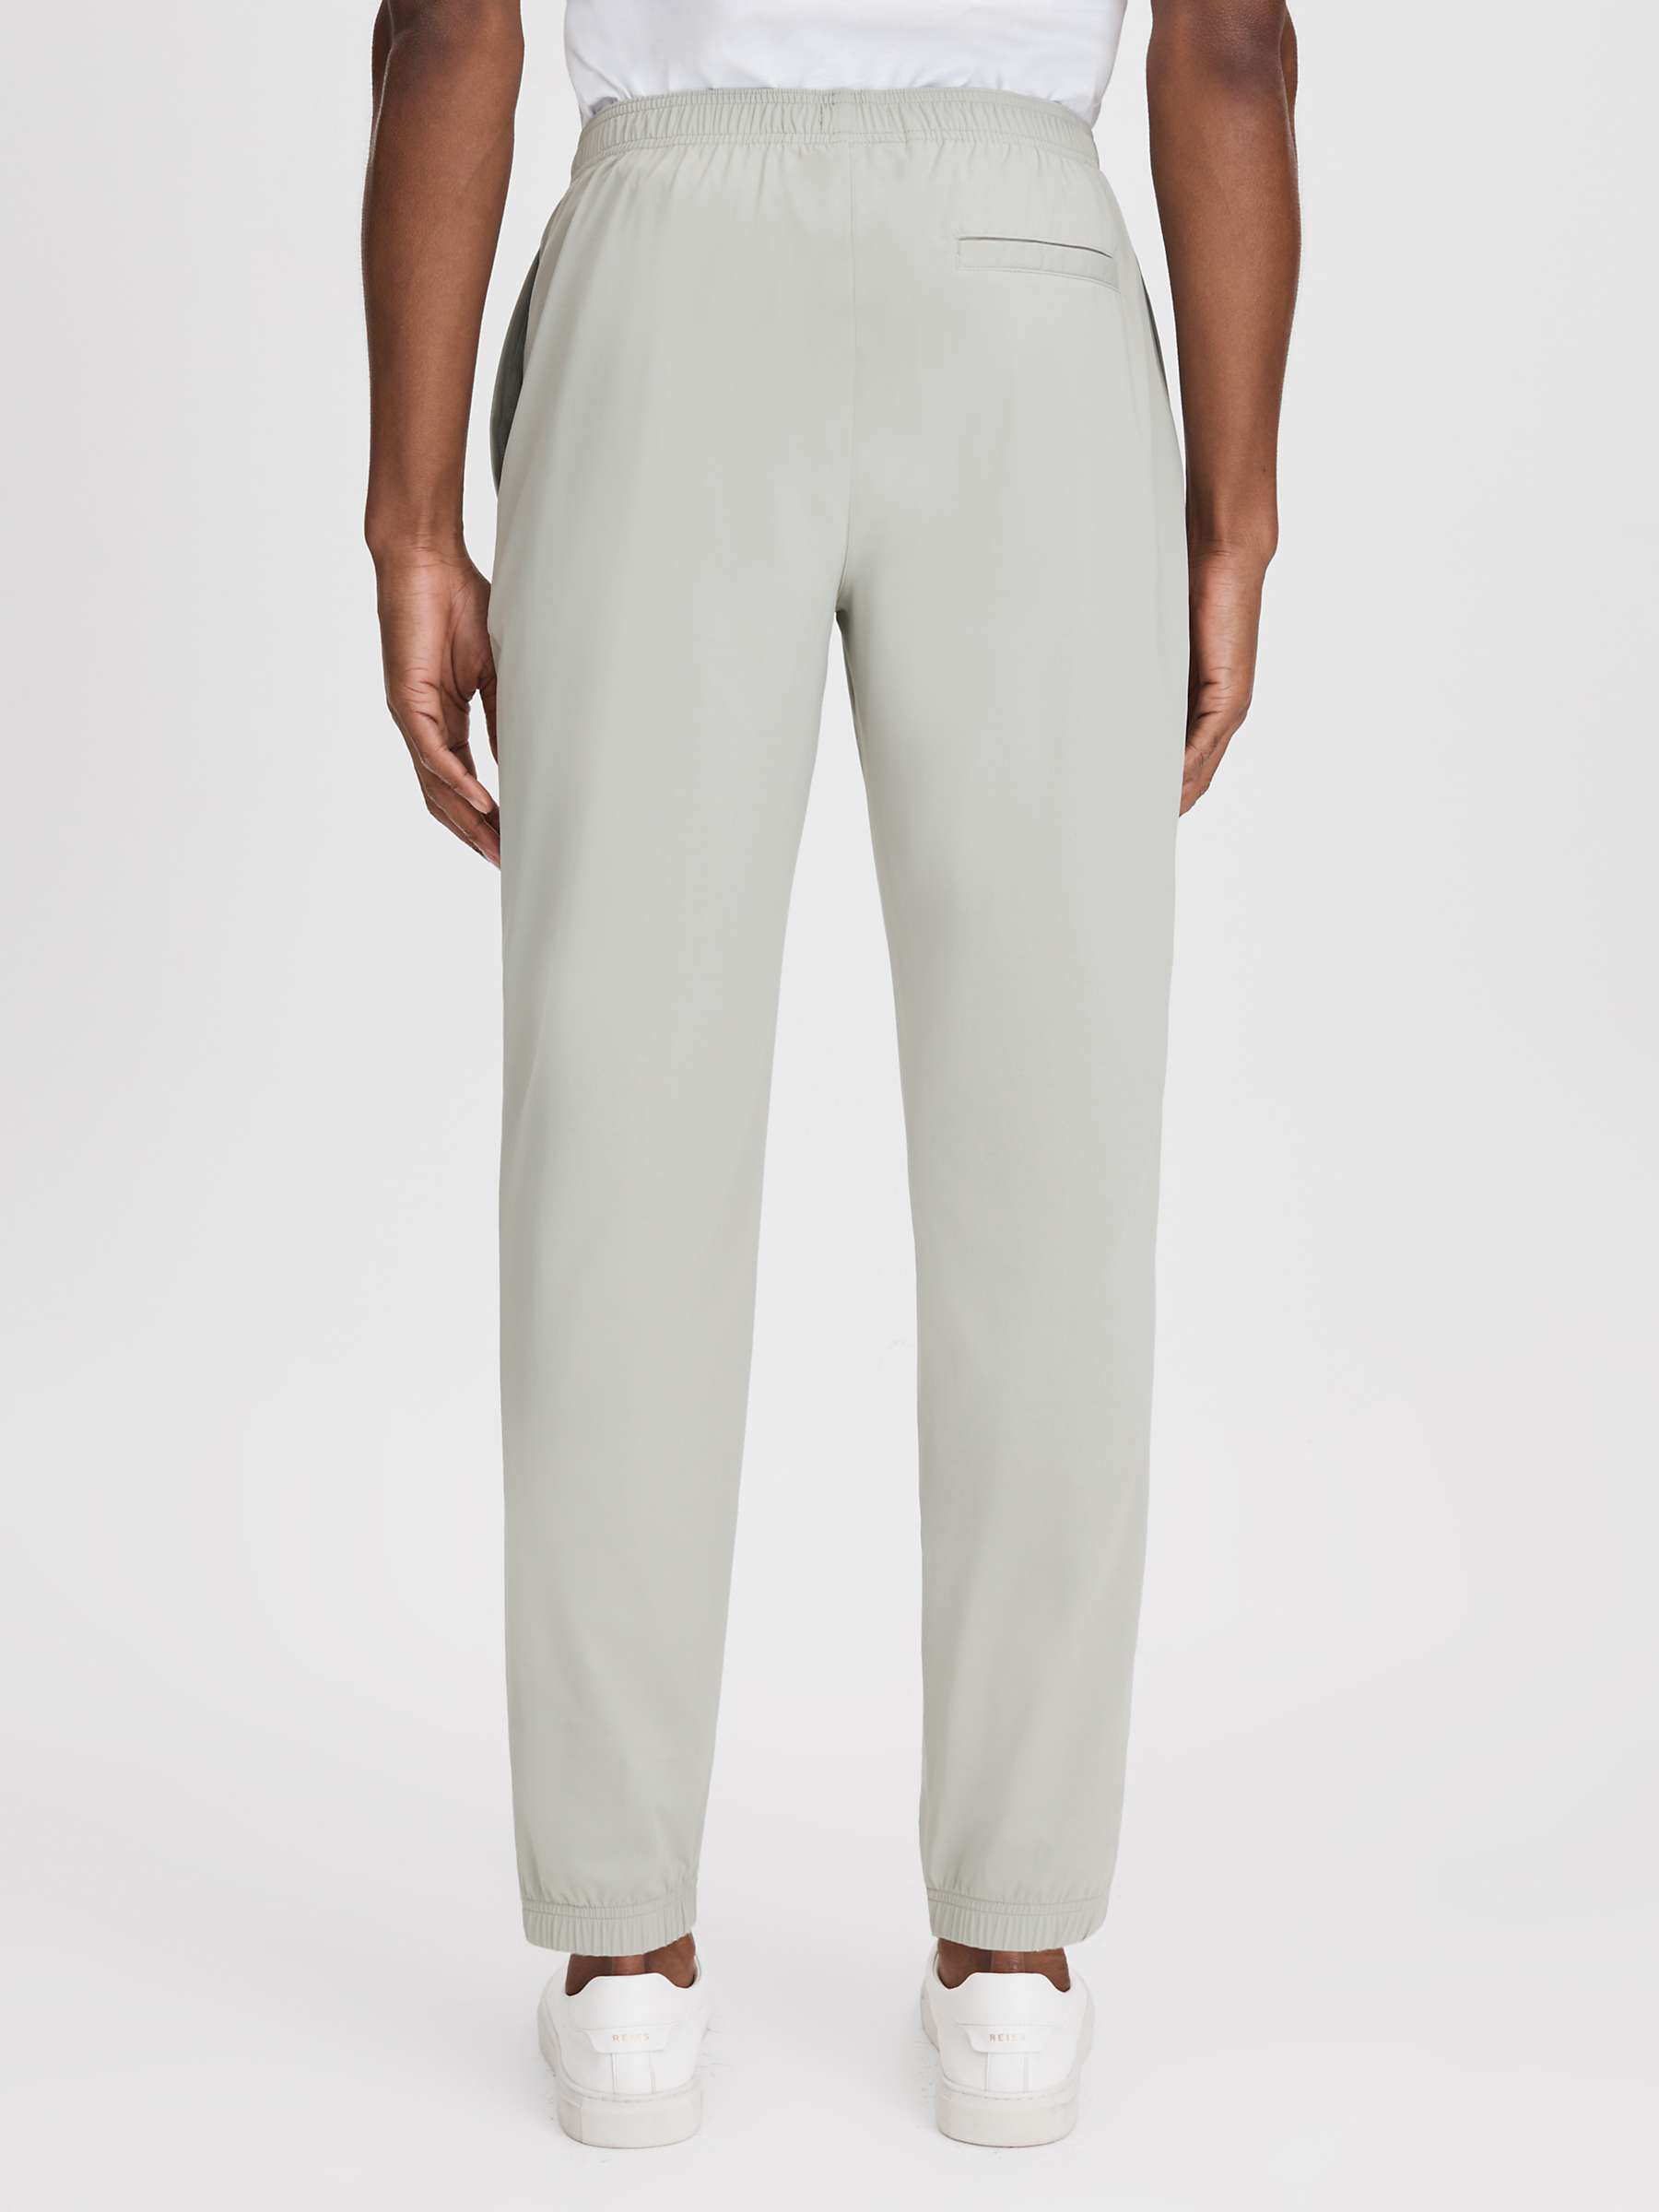 Buy Reiss Rival Straight Fit Technical Trousers Online at johnlewis.com